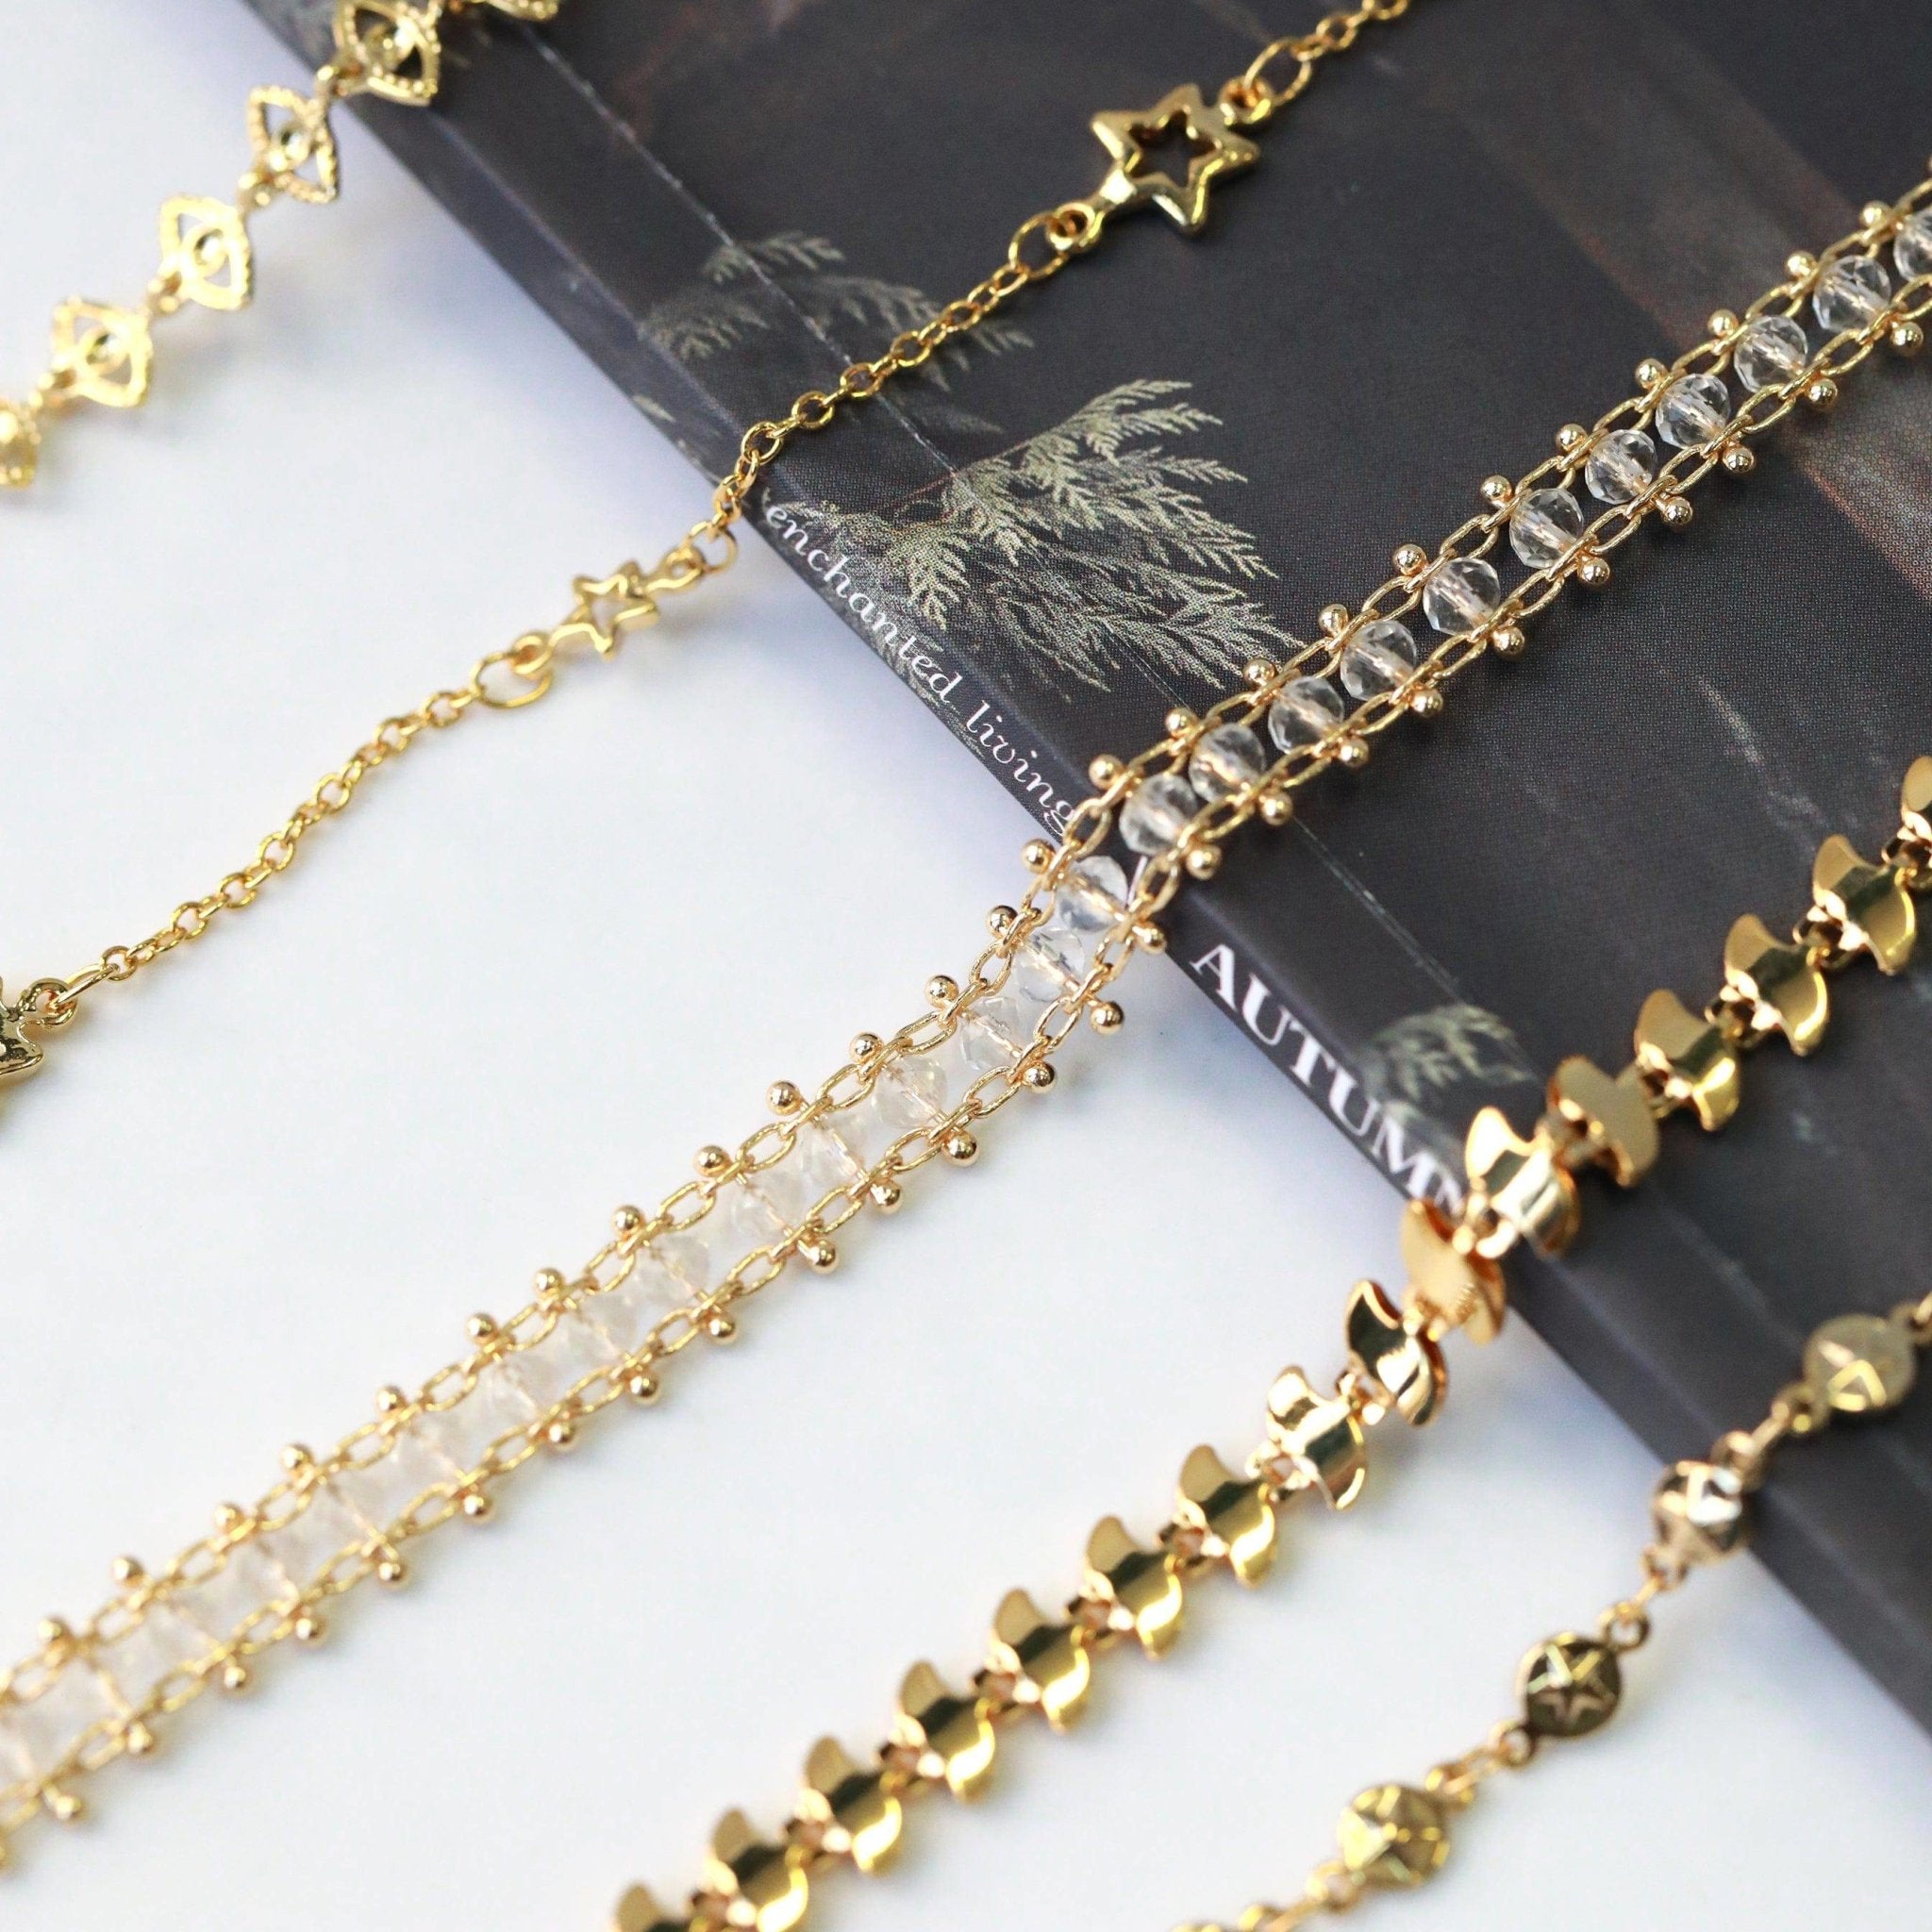 The Halliwell Chain Bracelet - Black/Gold & Clear/Gold - The Gilded Witch